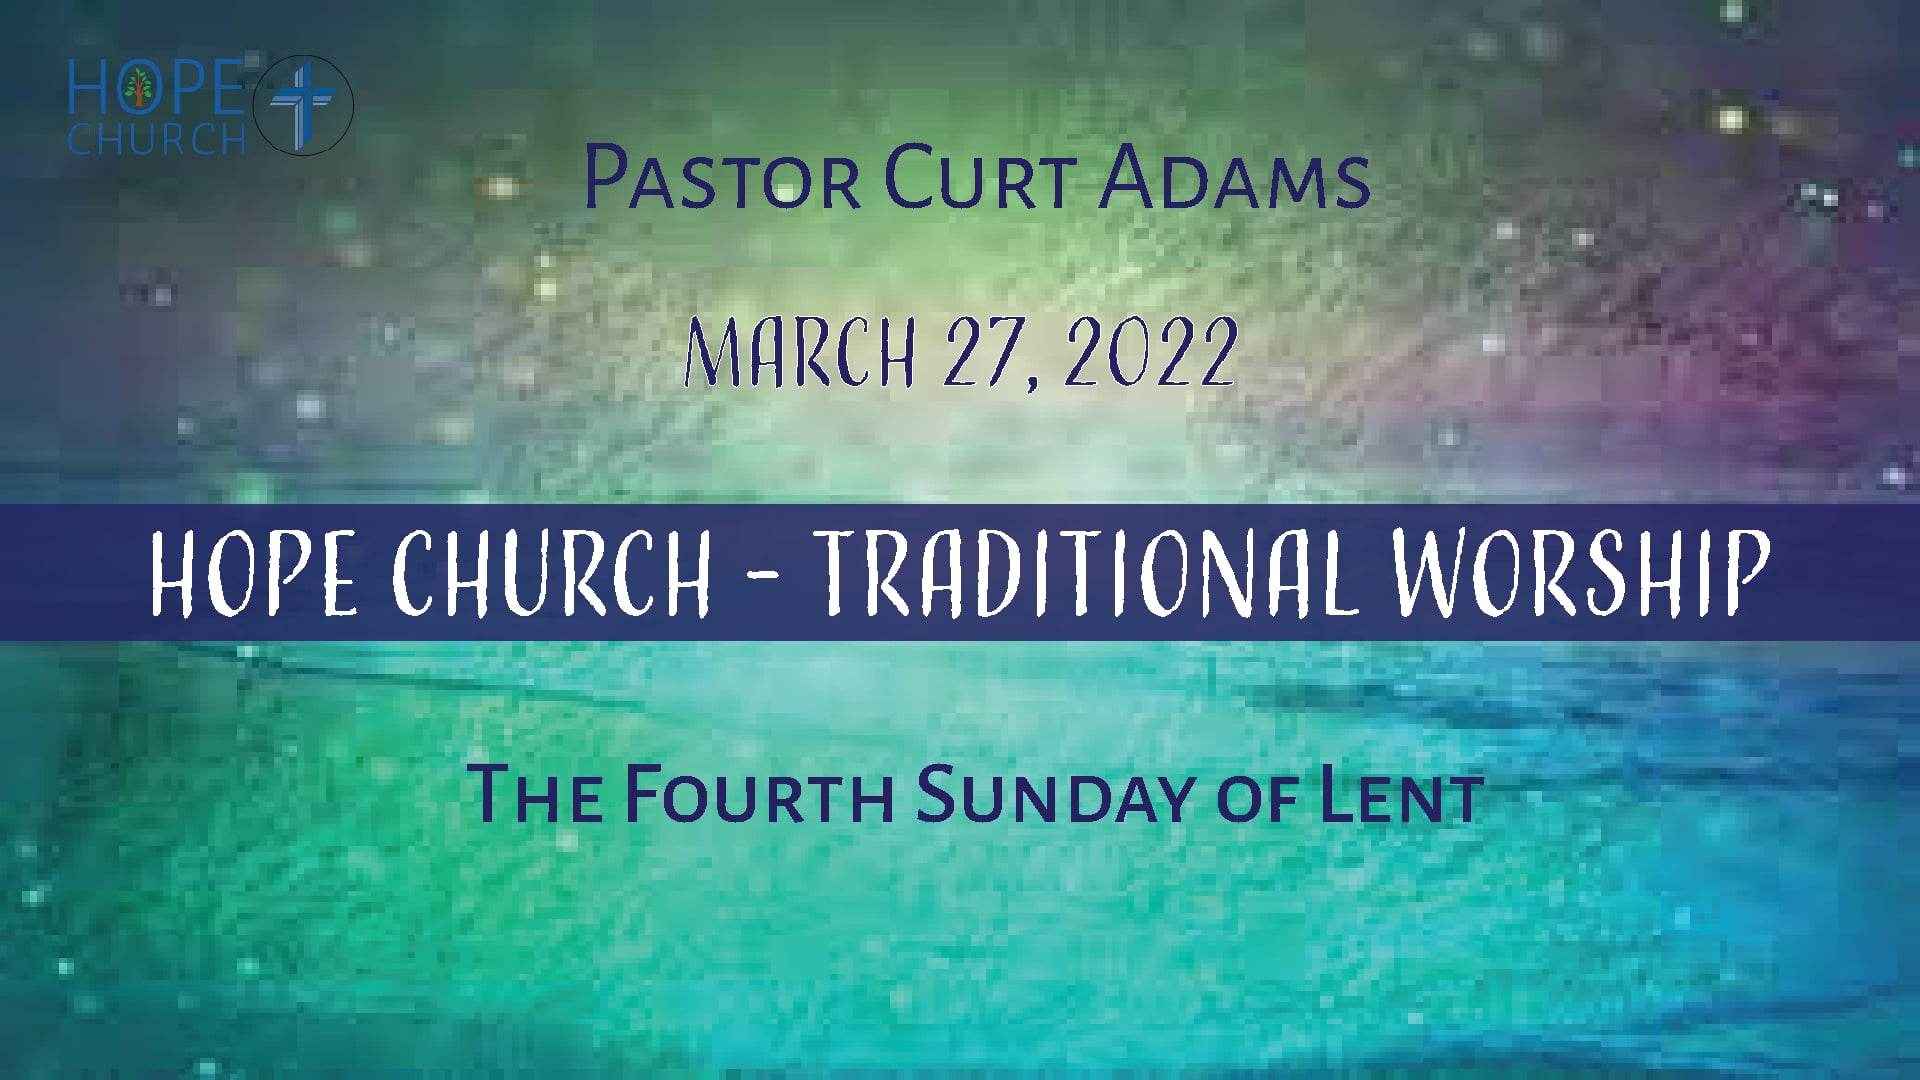 Hope Church - Traditional Worship March 27, 2022